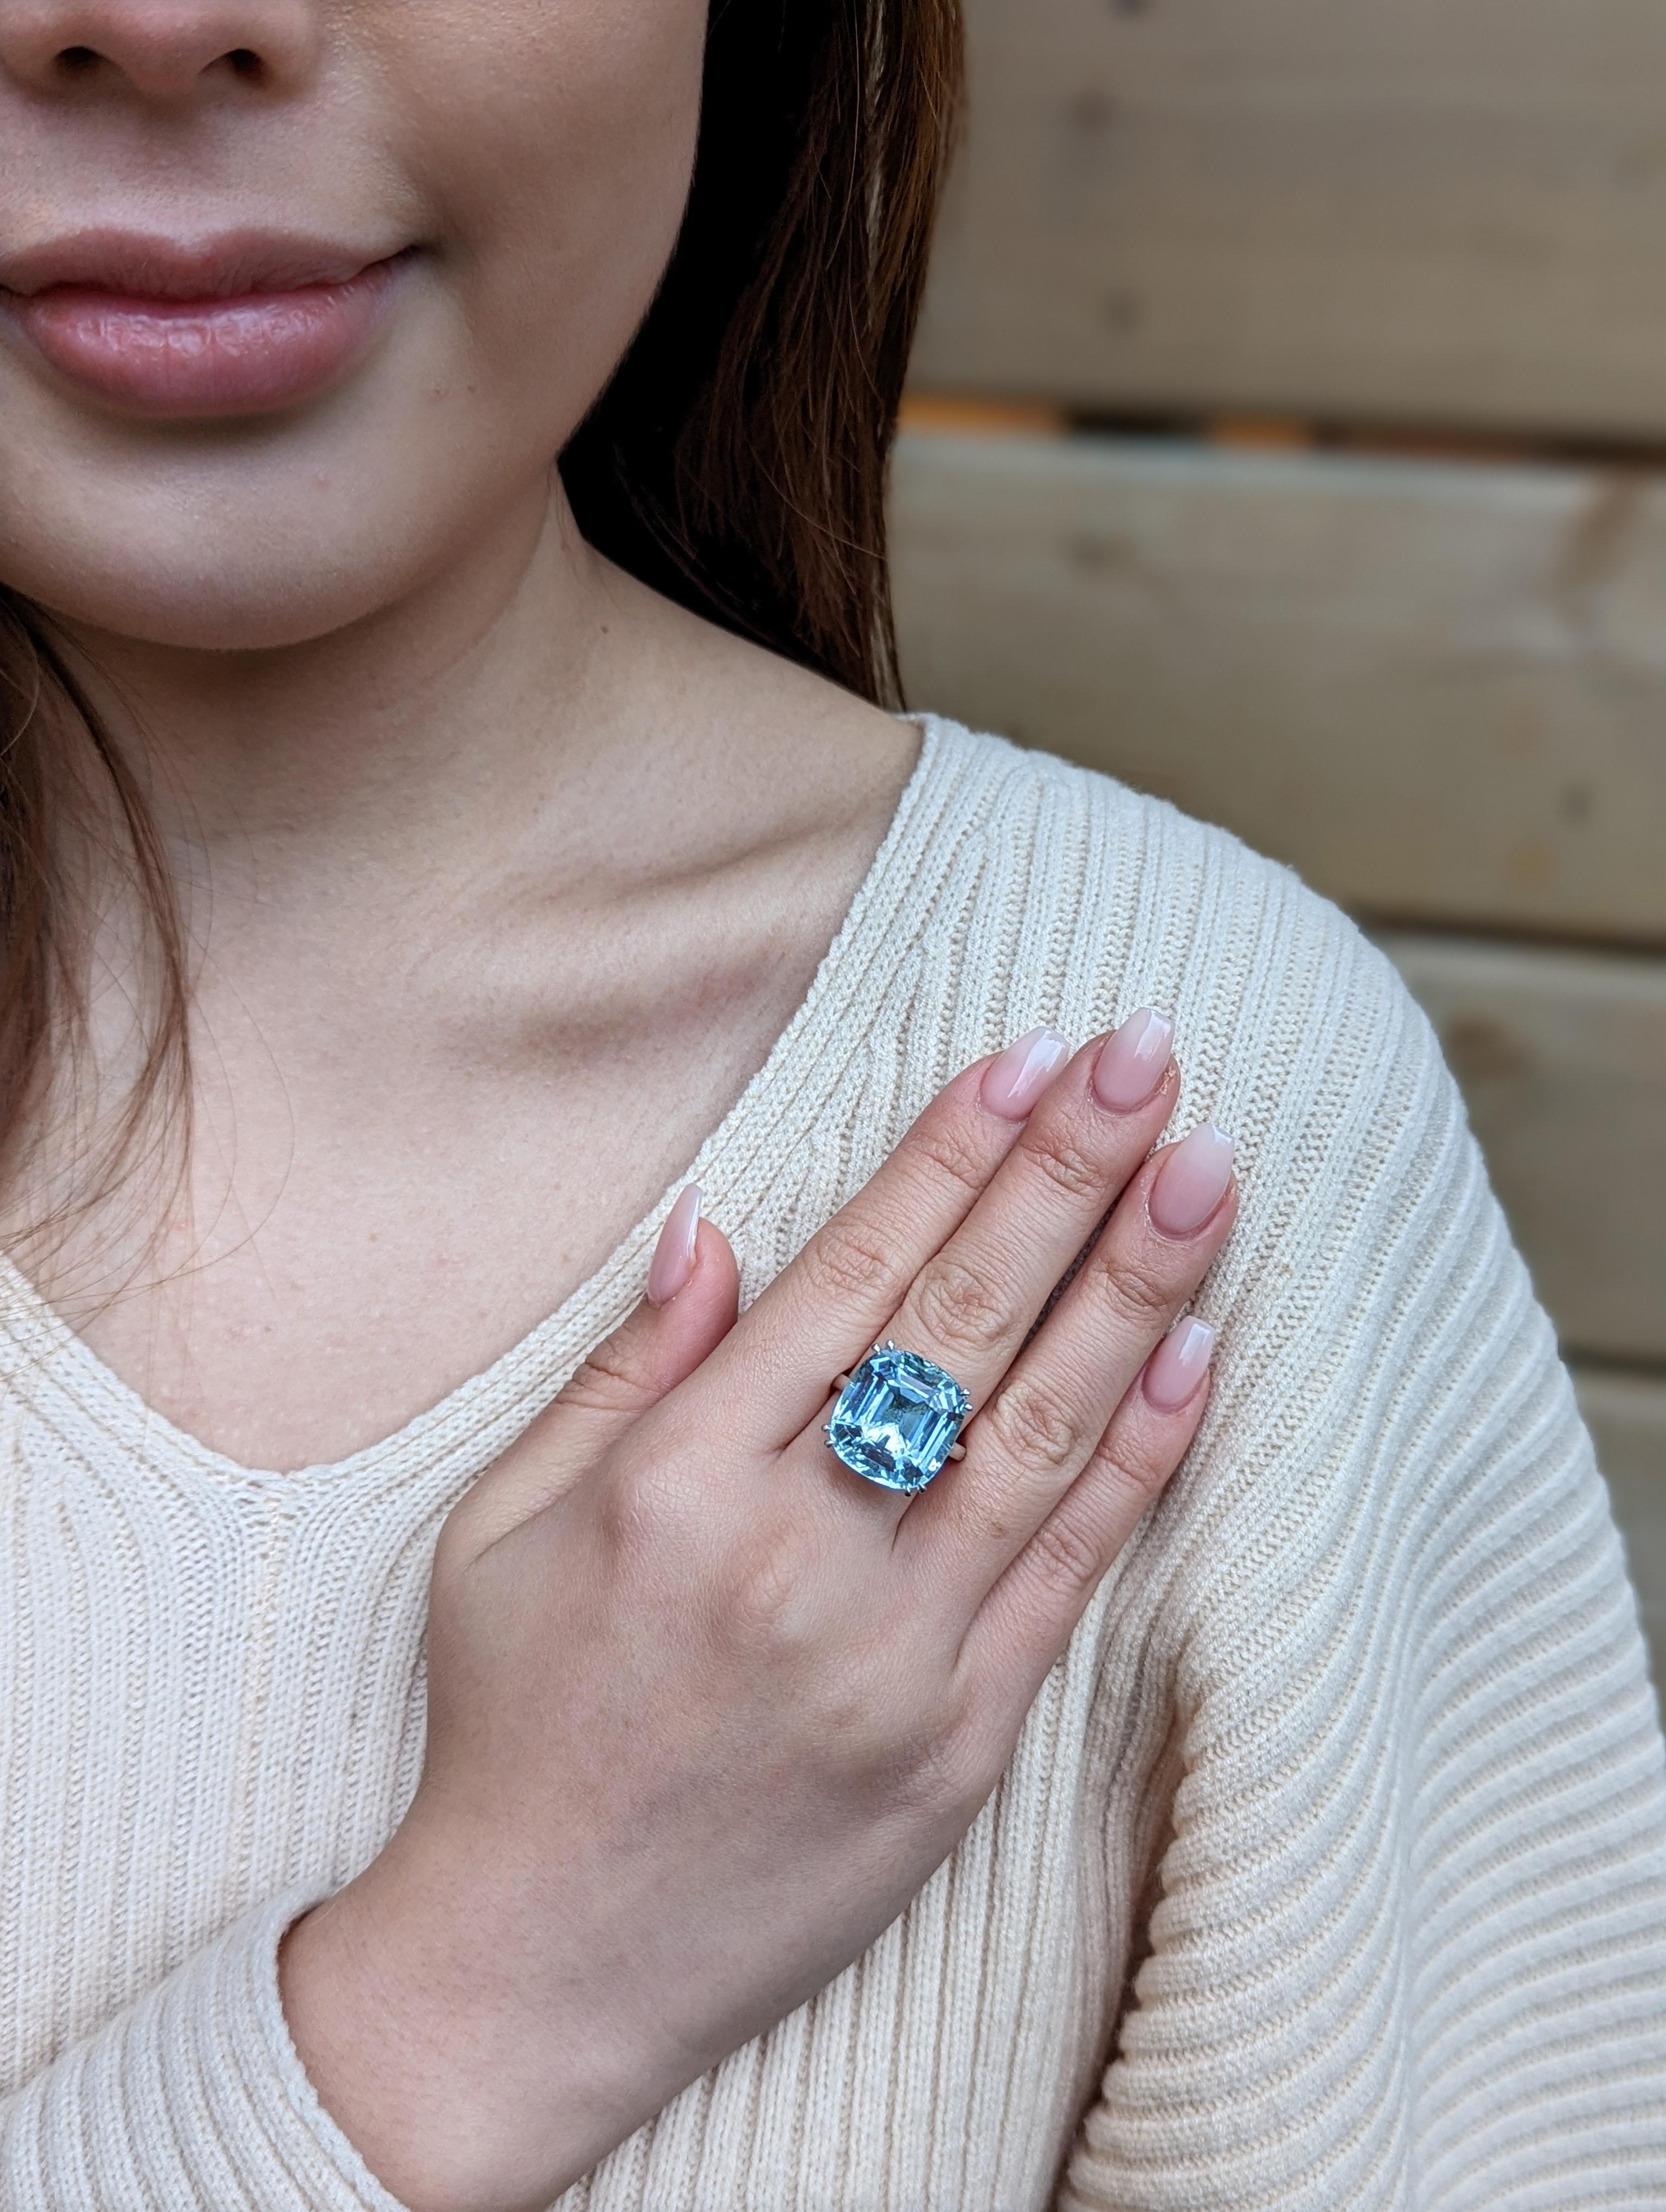 Crafted with care and precision, this ring is set in 18K white gold, giving it an exquisite shine that complements the gemstone's subtle blue hues. In addition, the GIA certification guarantees that the aquamarine is of the finest quality and has